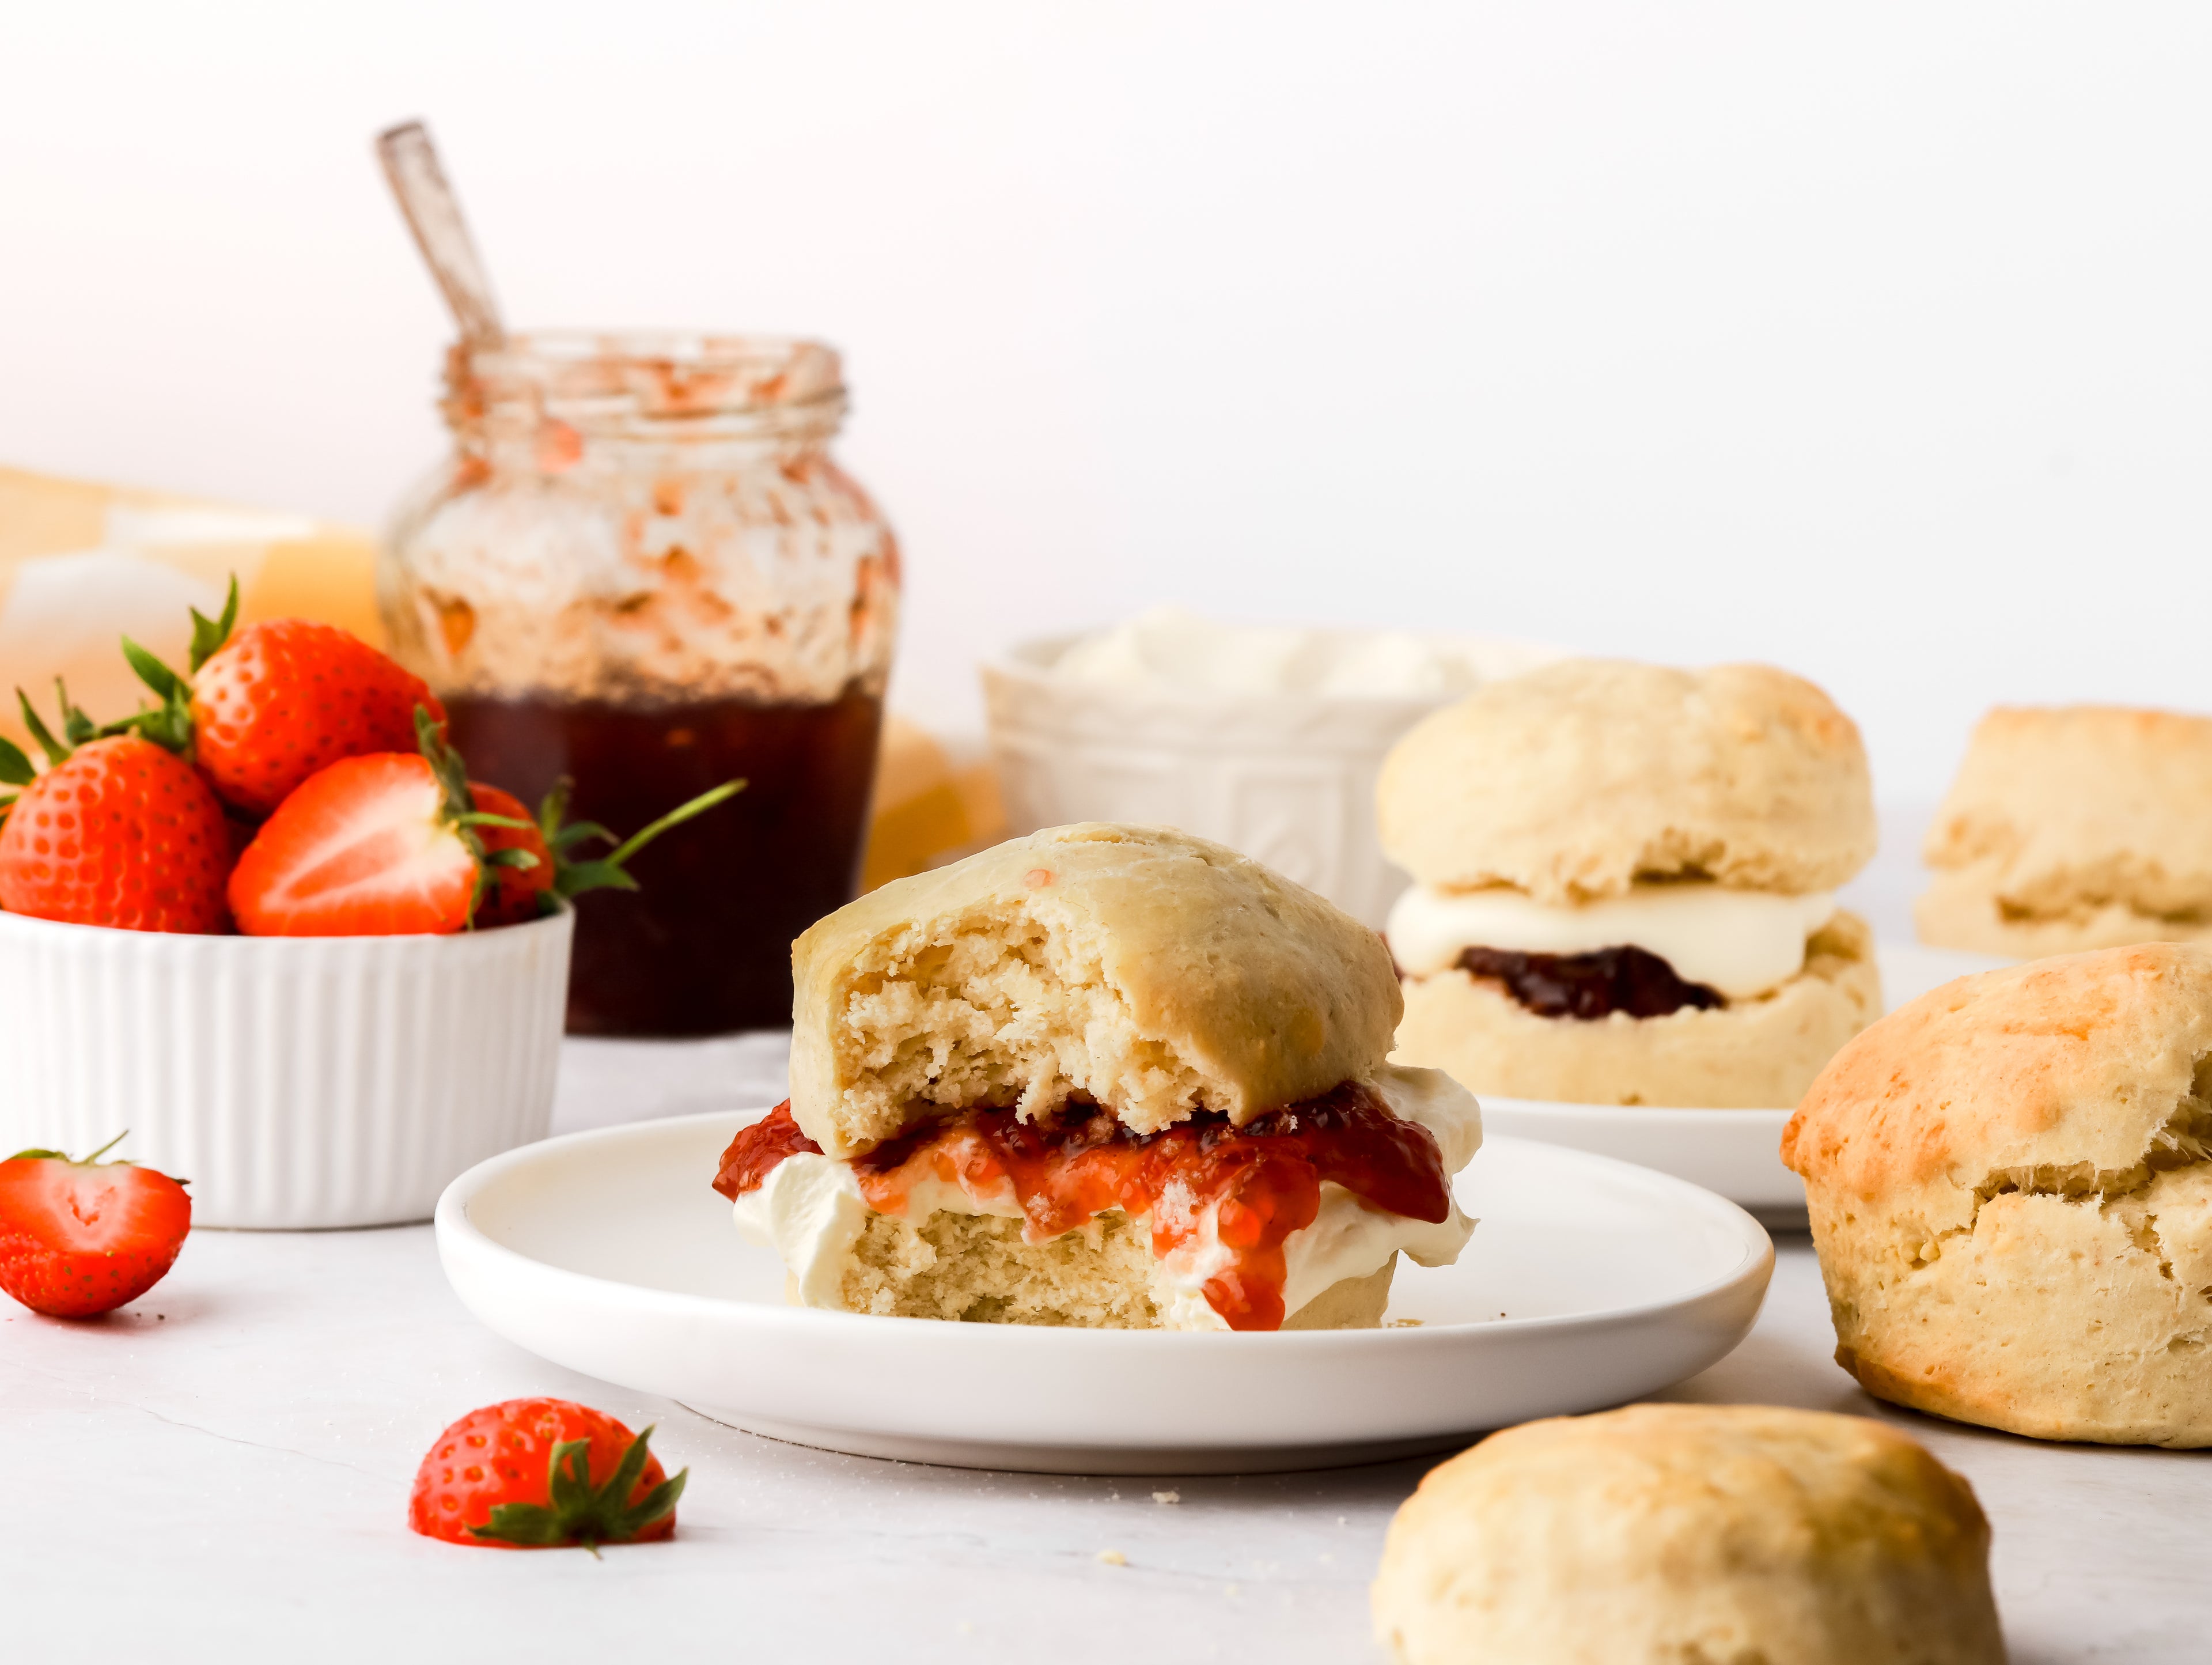 Going, going, SCONE!